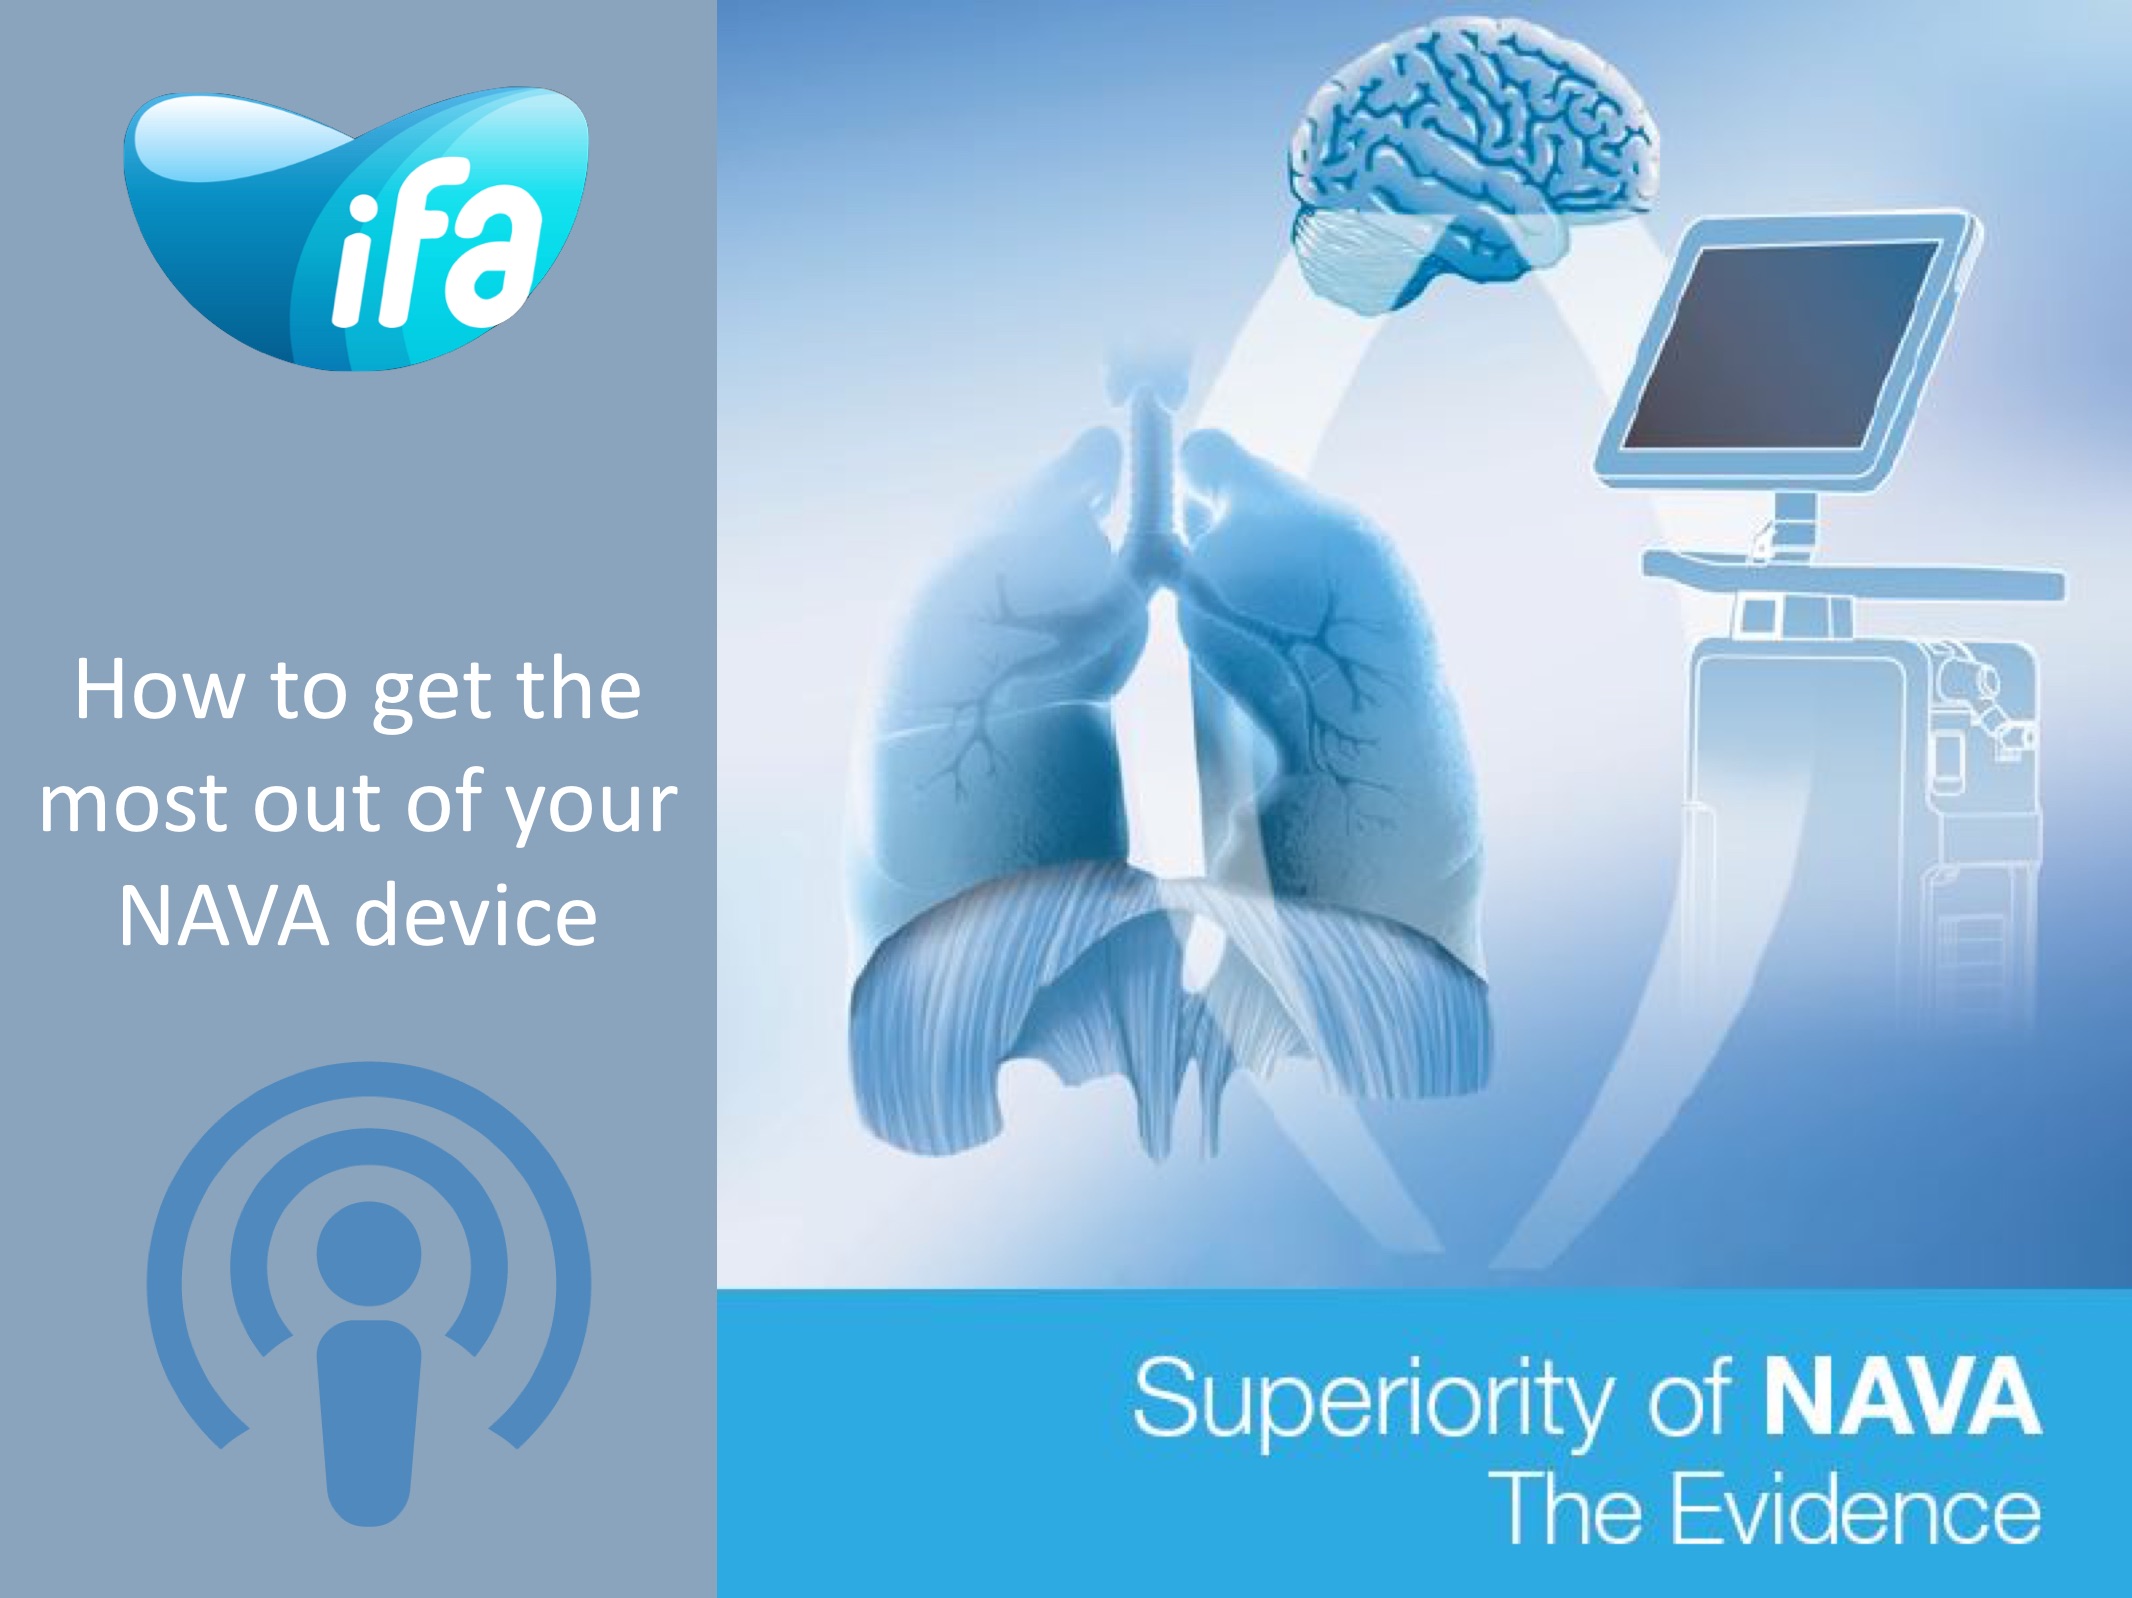 How to get the most out of your NAVA device?